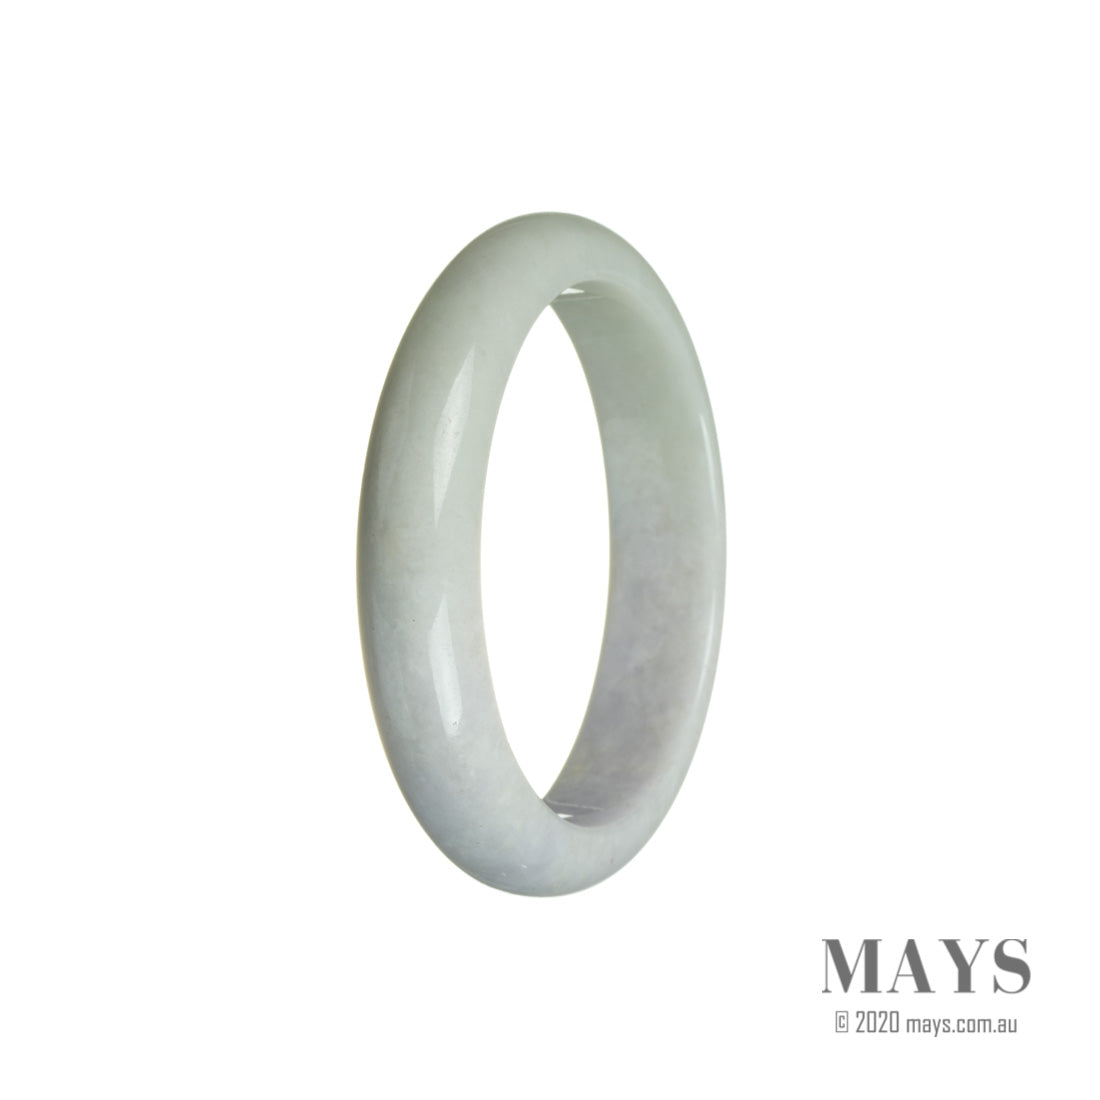 A beautiful lavender and green jadeite bangle in a half moon shape, made with genuine Grade A stones. Perfect for adding a touch of elegance to any outfit.